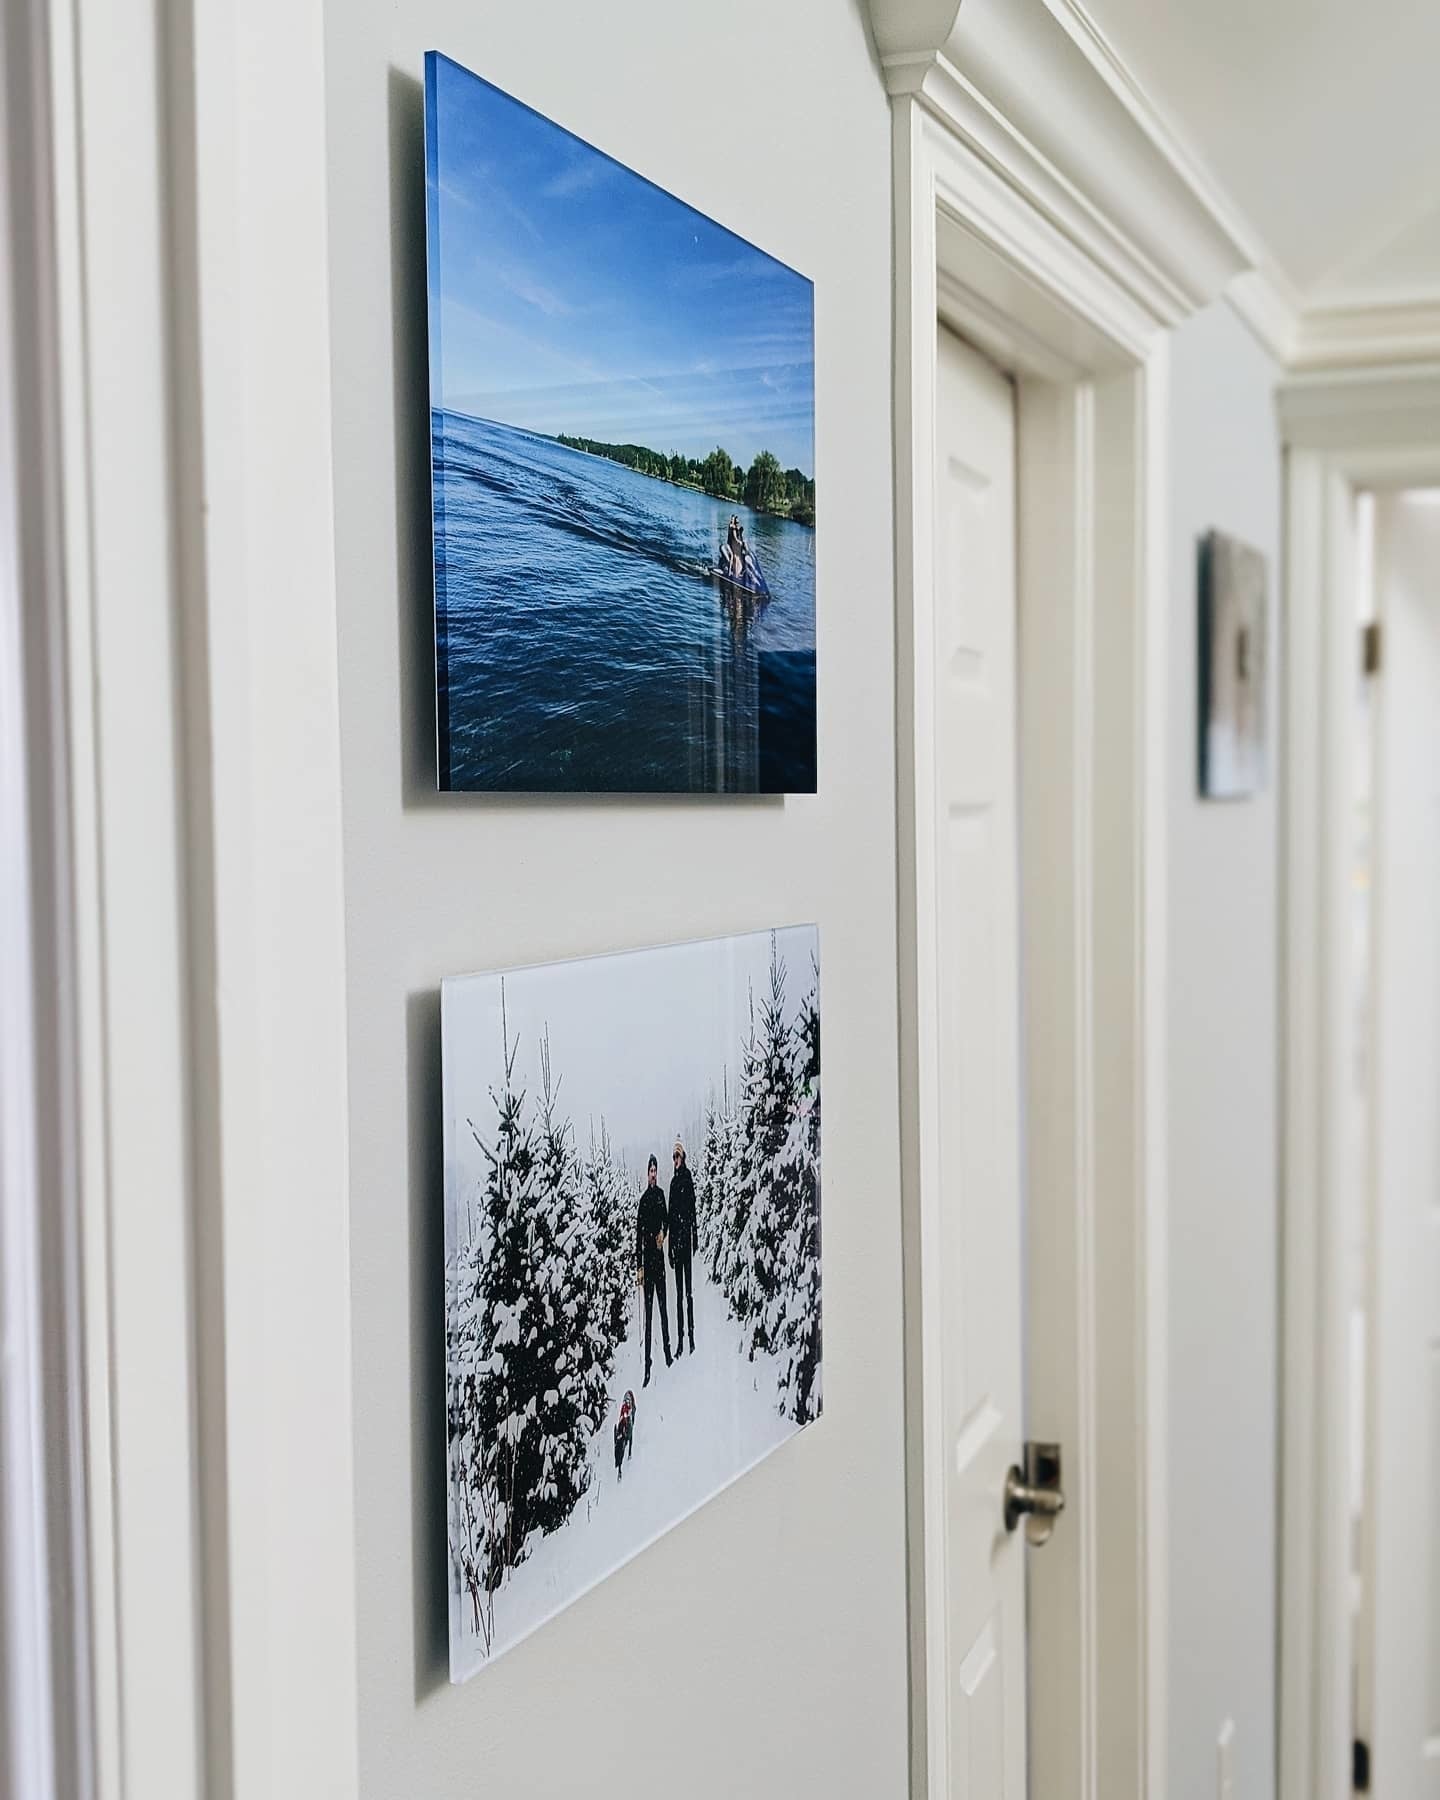 Acrylic Prints Hanging on the Wall - Photo by Posterjack Customer